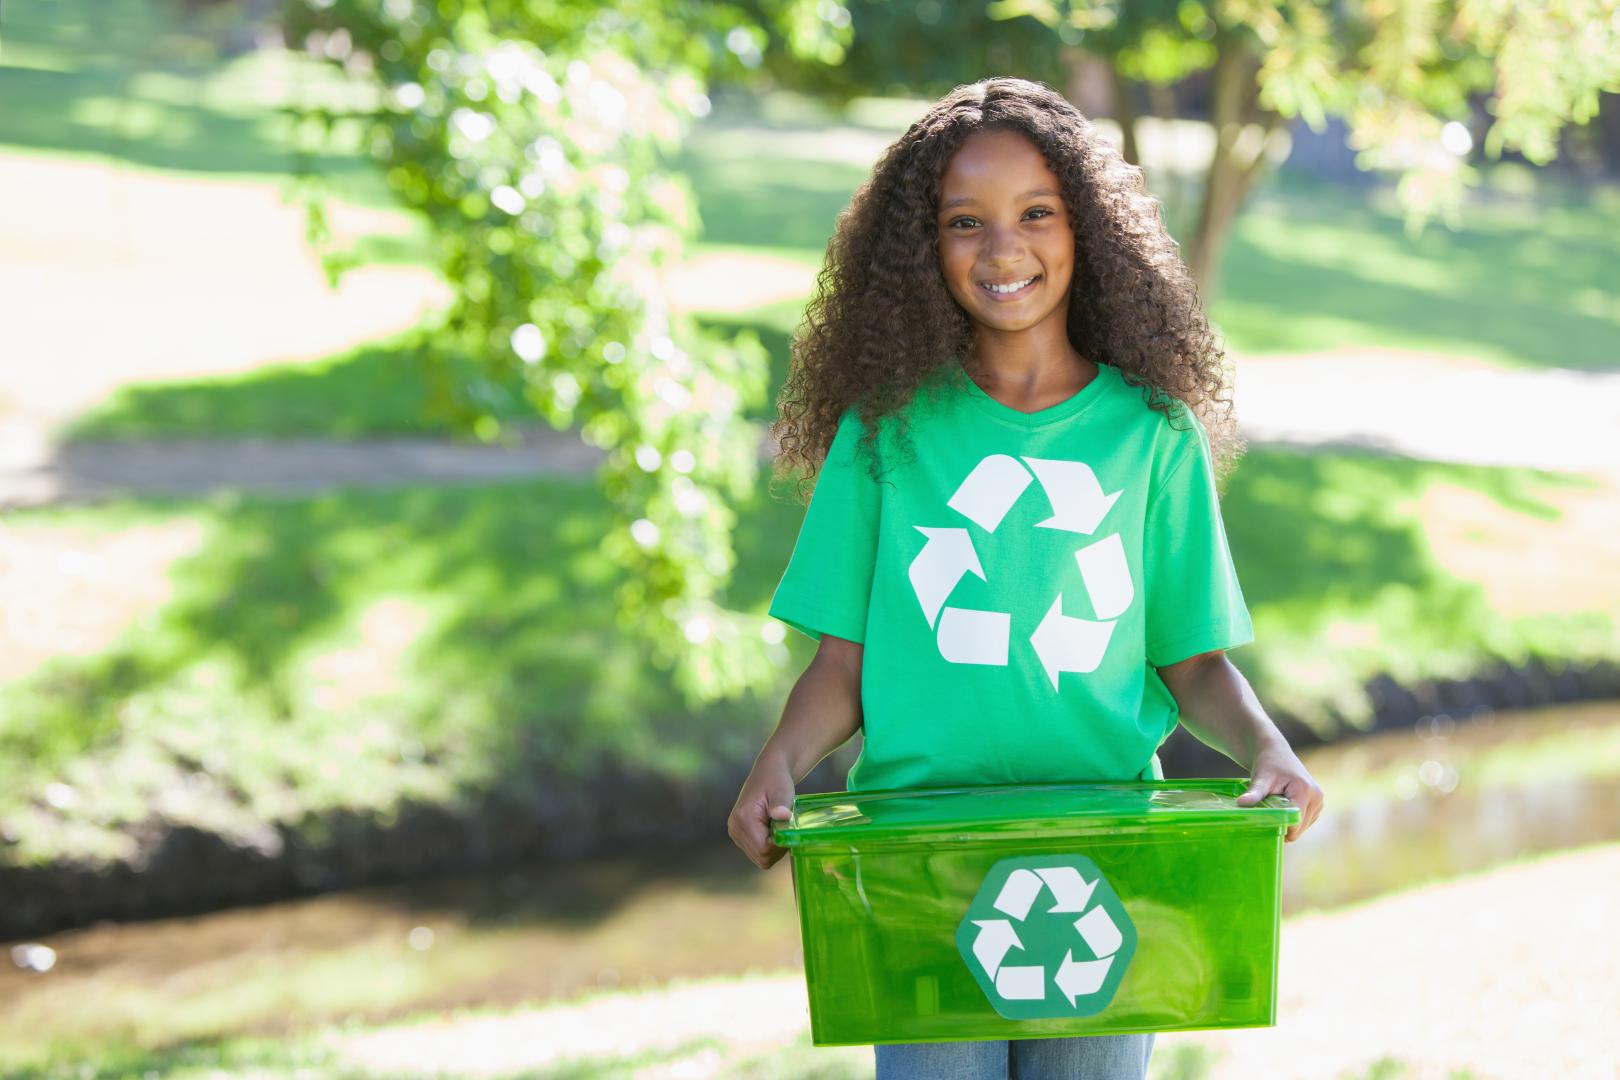 Girl holding a recycling container